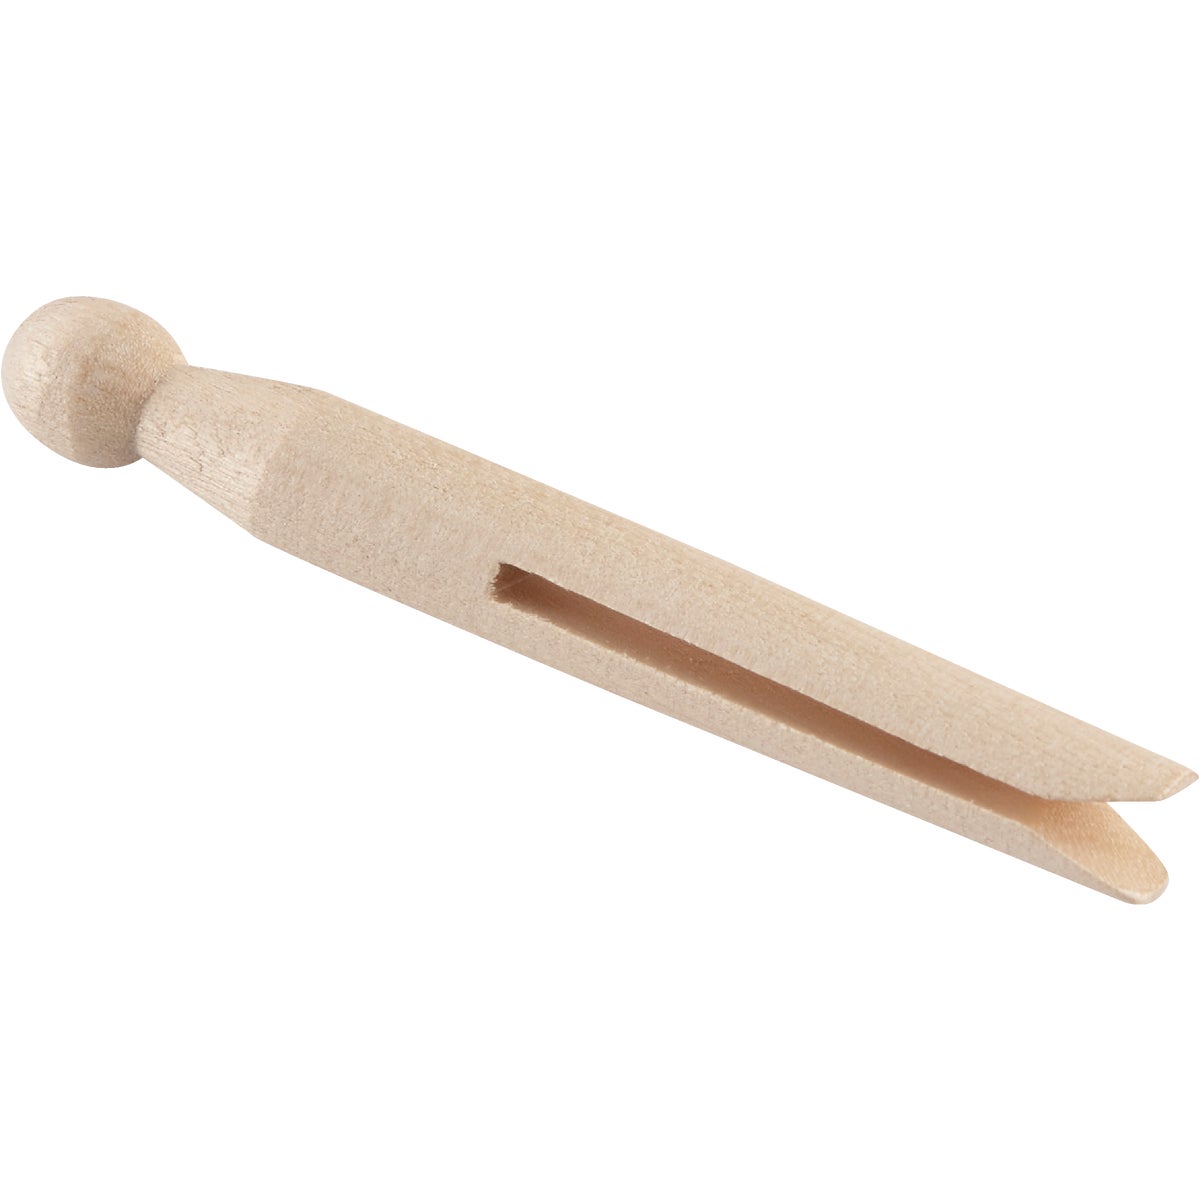 Item 616435, These are the kind of classic round wooden clothespins a granny would use.